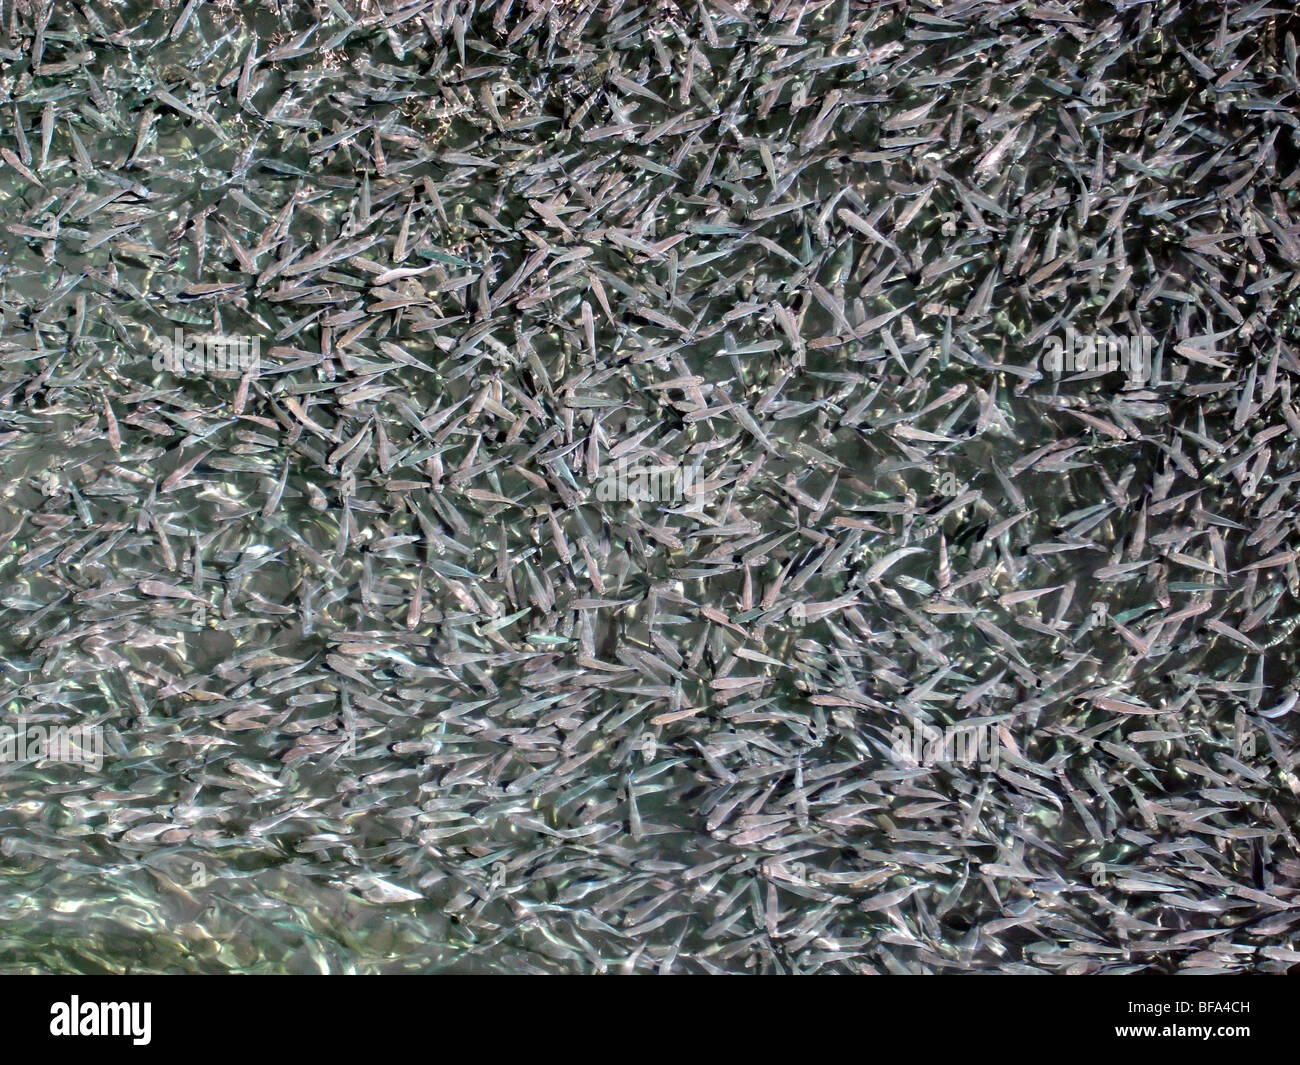 Dense school of mullet in shallow water Stock Photo